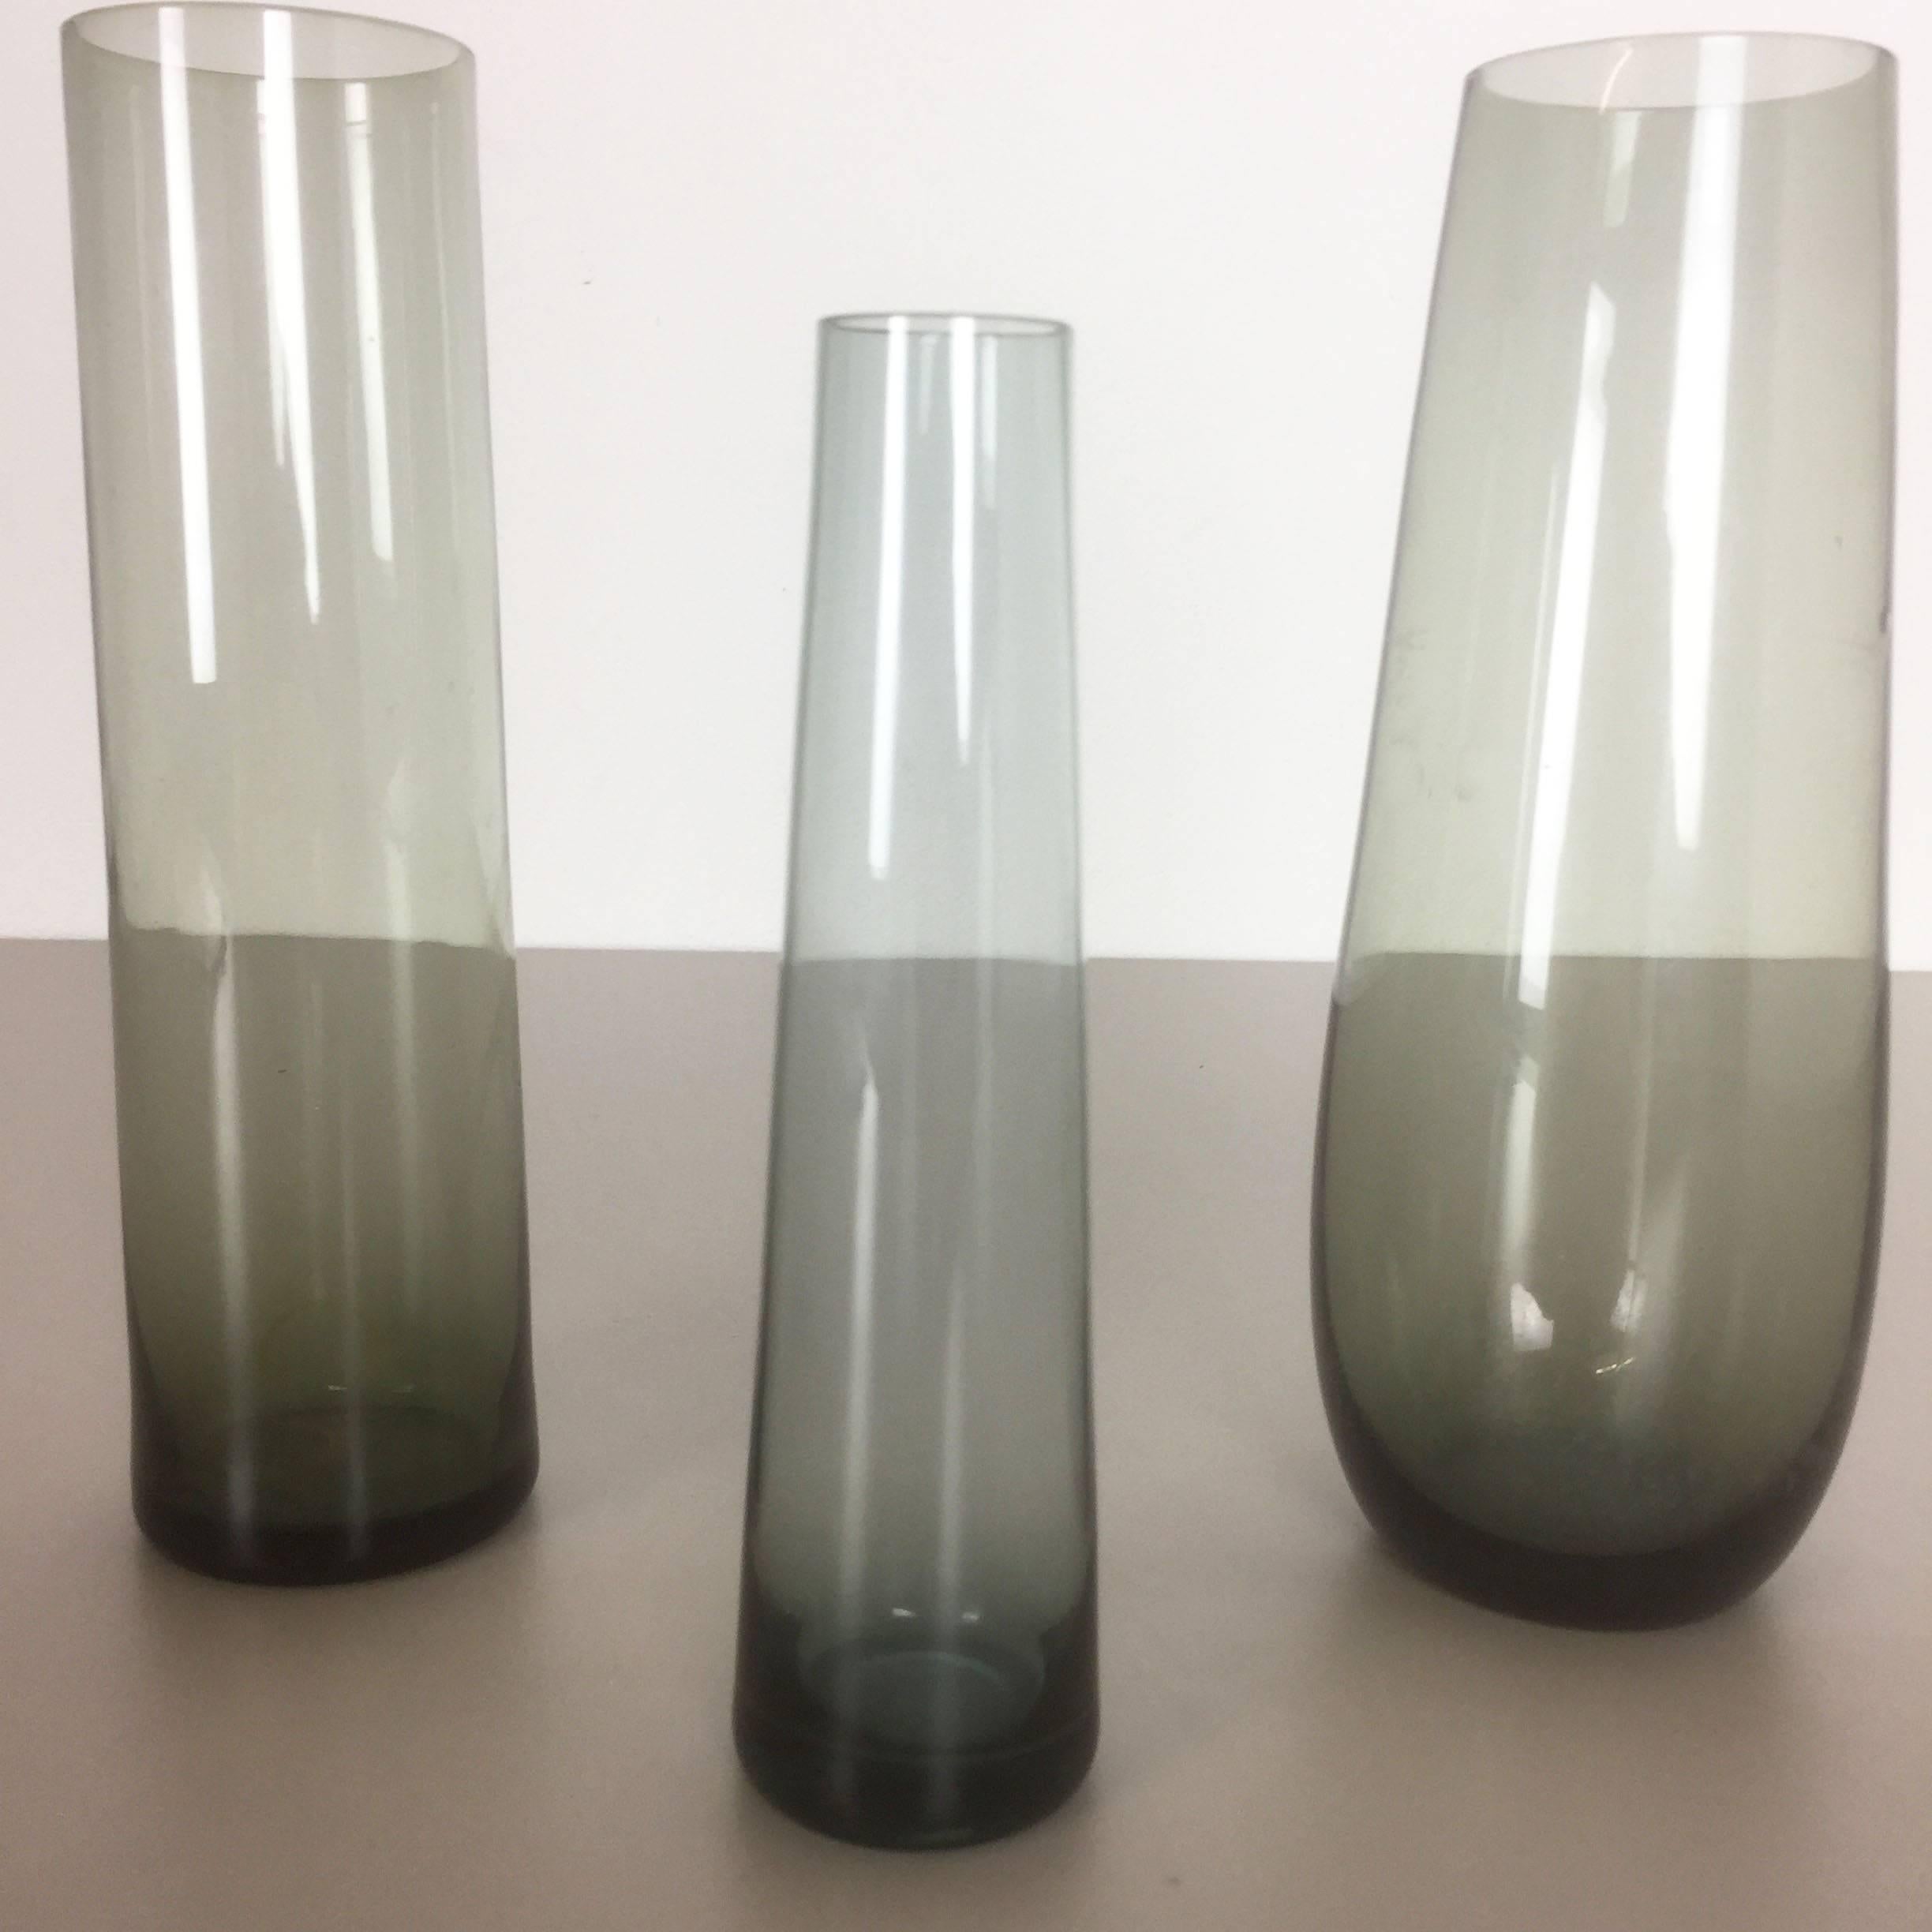 Vintage 1960s Set of Three Turmalin Vases by Wilhelm Wagenfeld for WMF, Germany 1